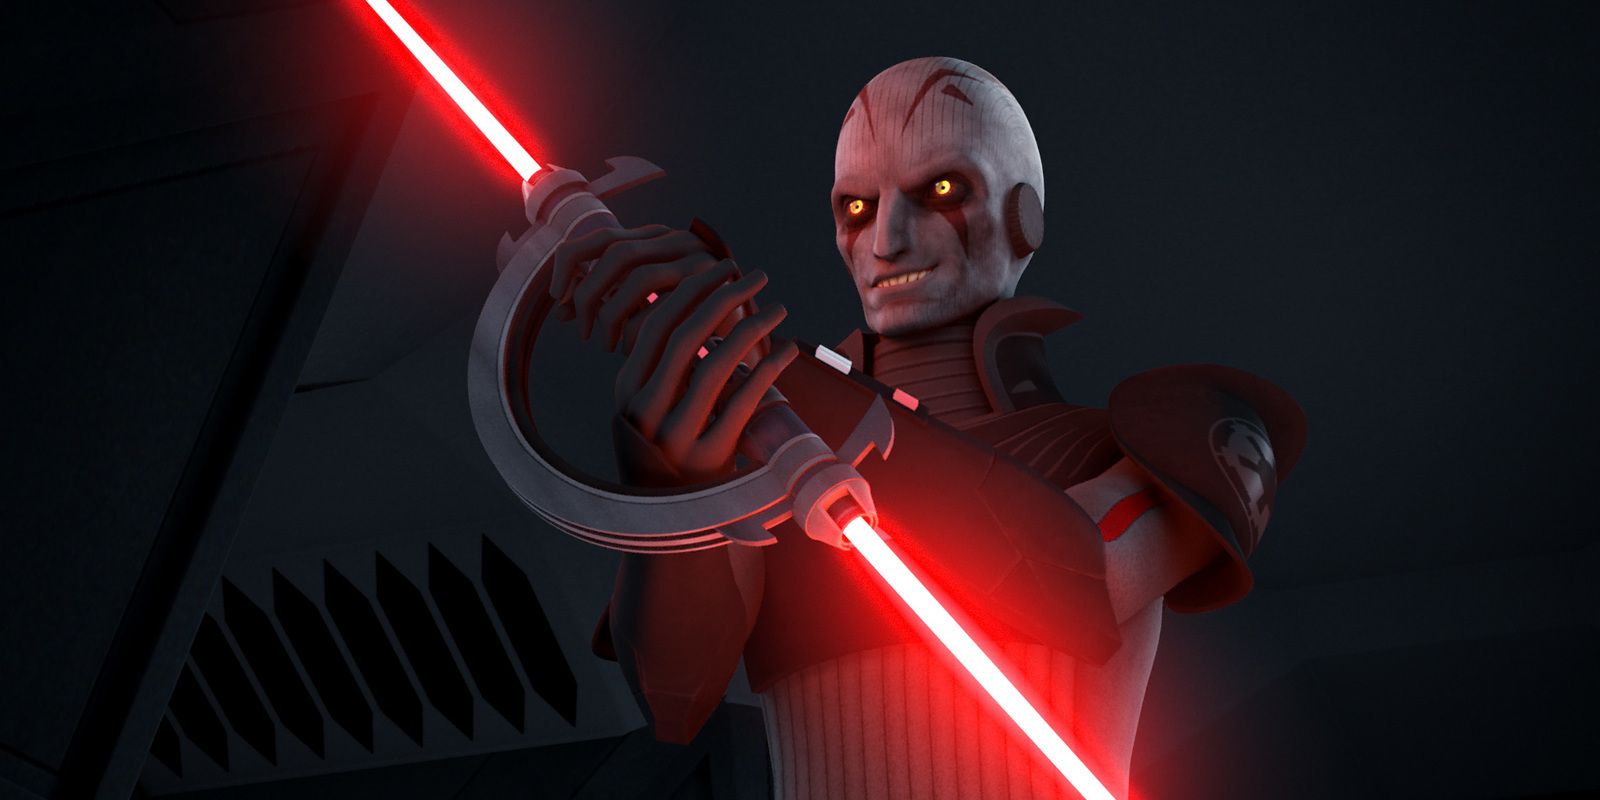 The Grand Inquisitor's (Spinning) Lightsaber